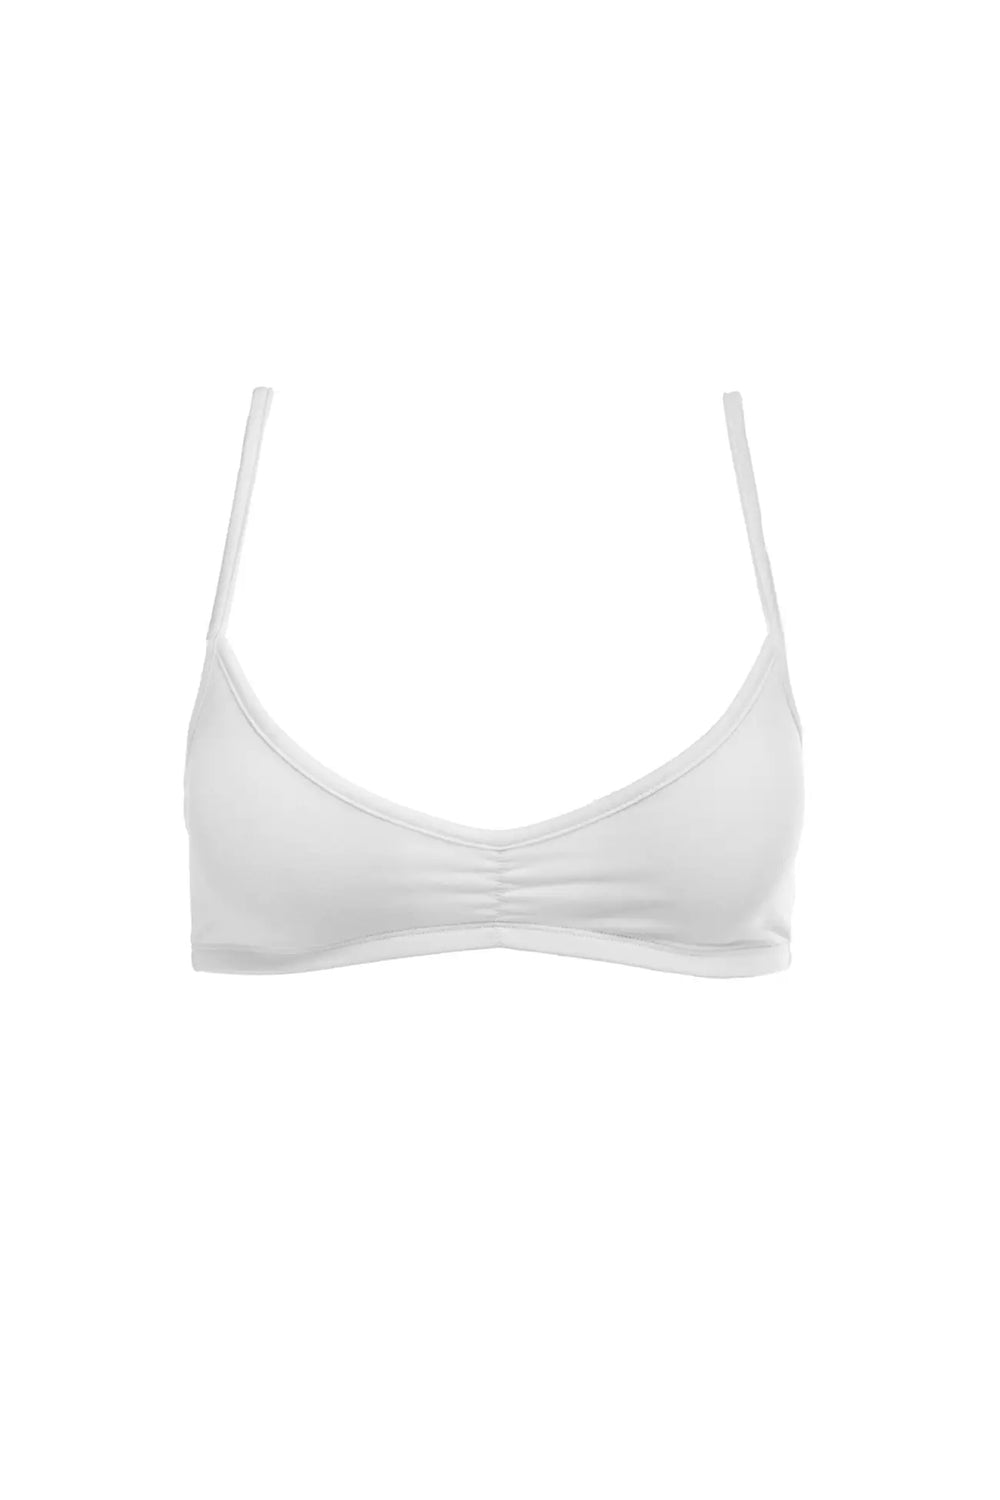 White bralette made in Canada with ruched detailing